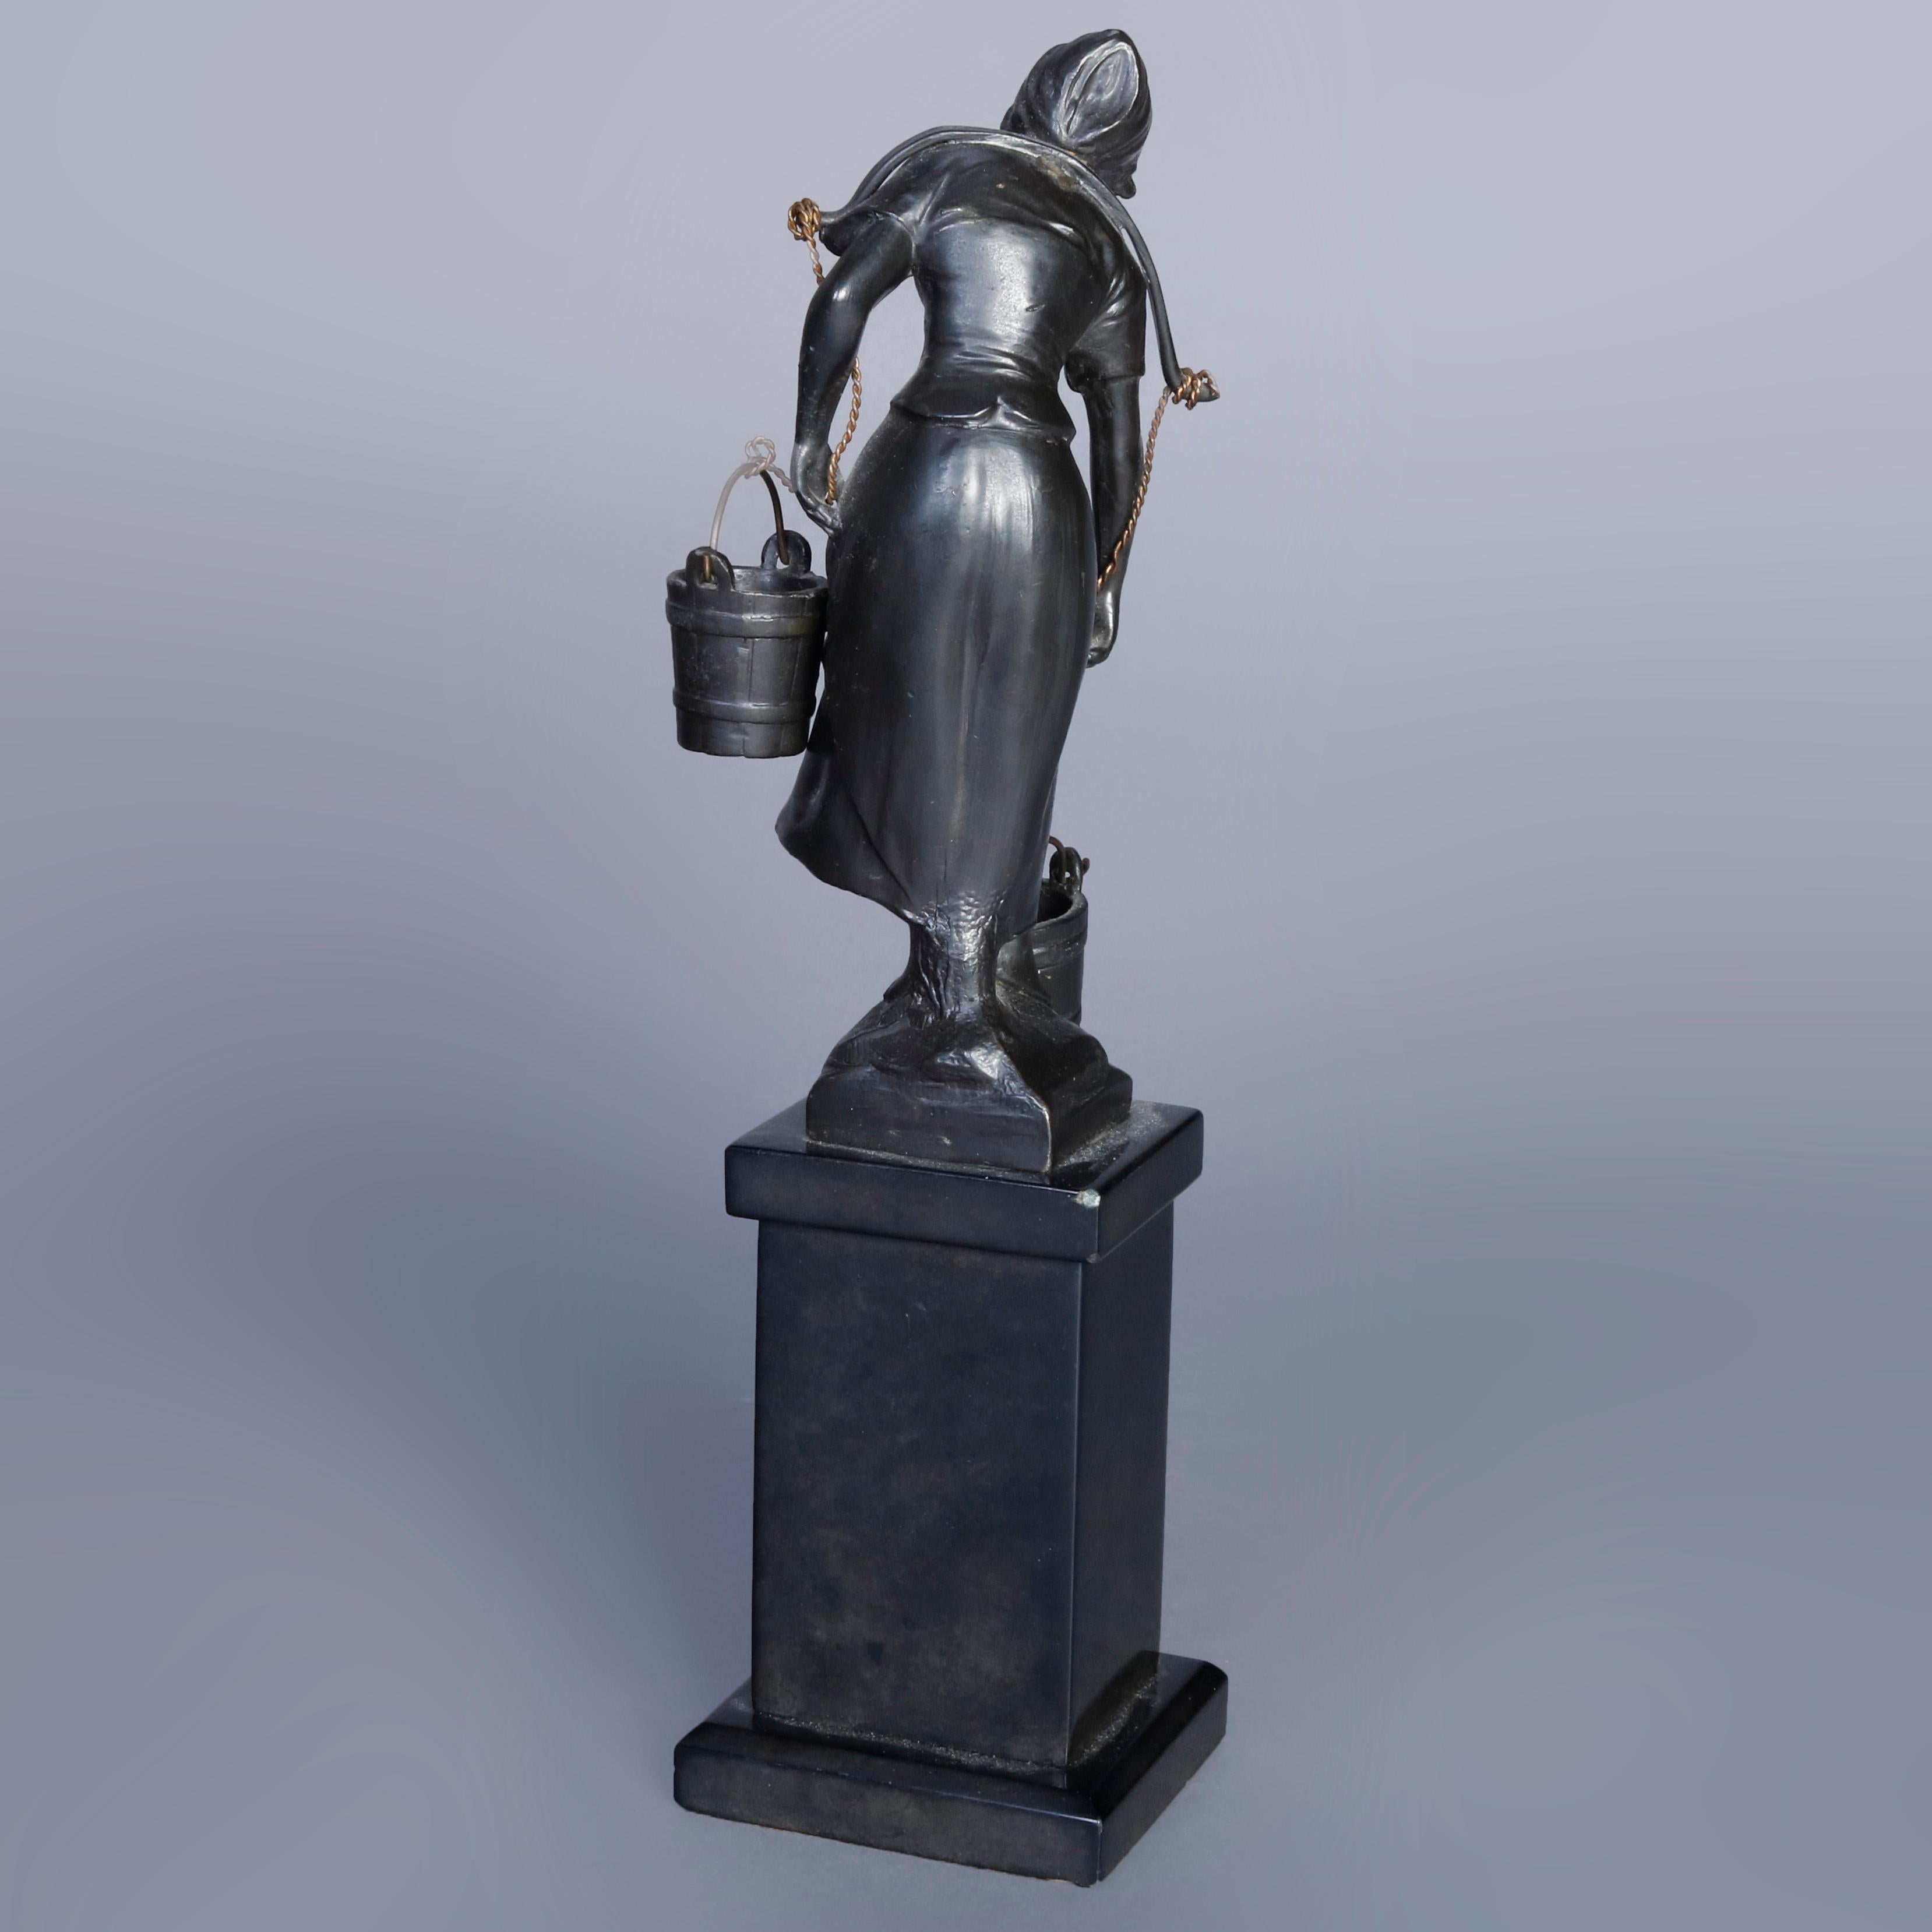 An antique cast bronze portrait sculpture depicts young woman carrying water buckets, seated on marble plinth, circa 1900

Measures- 10'' H x 3.25'' W x 2.75